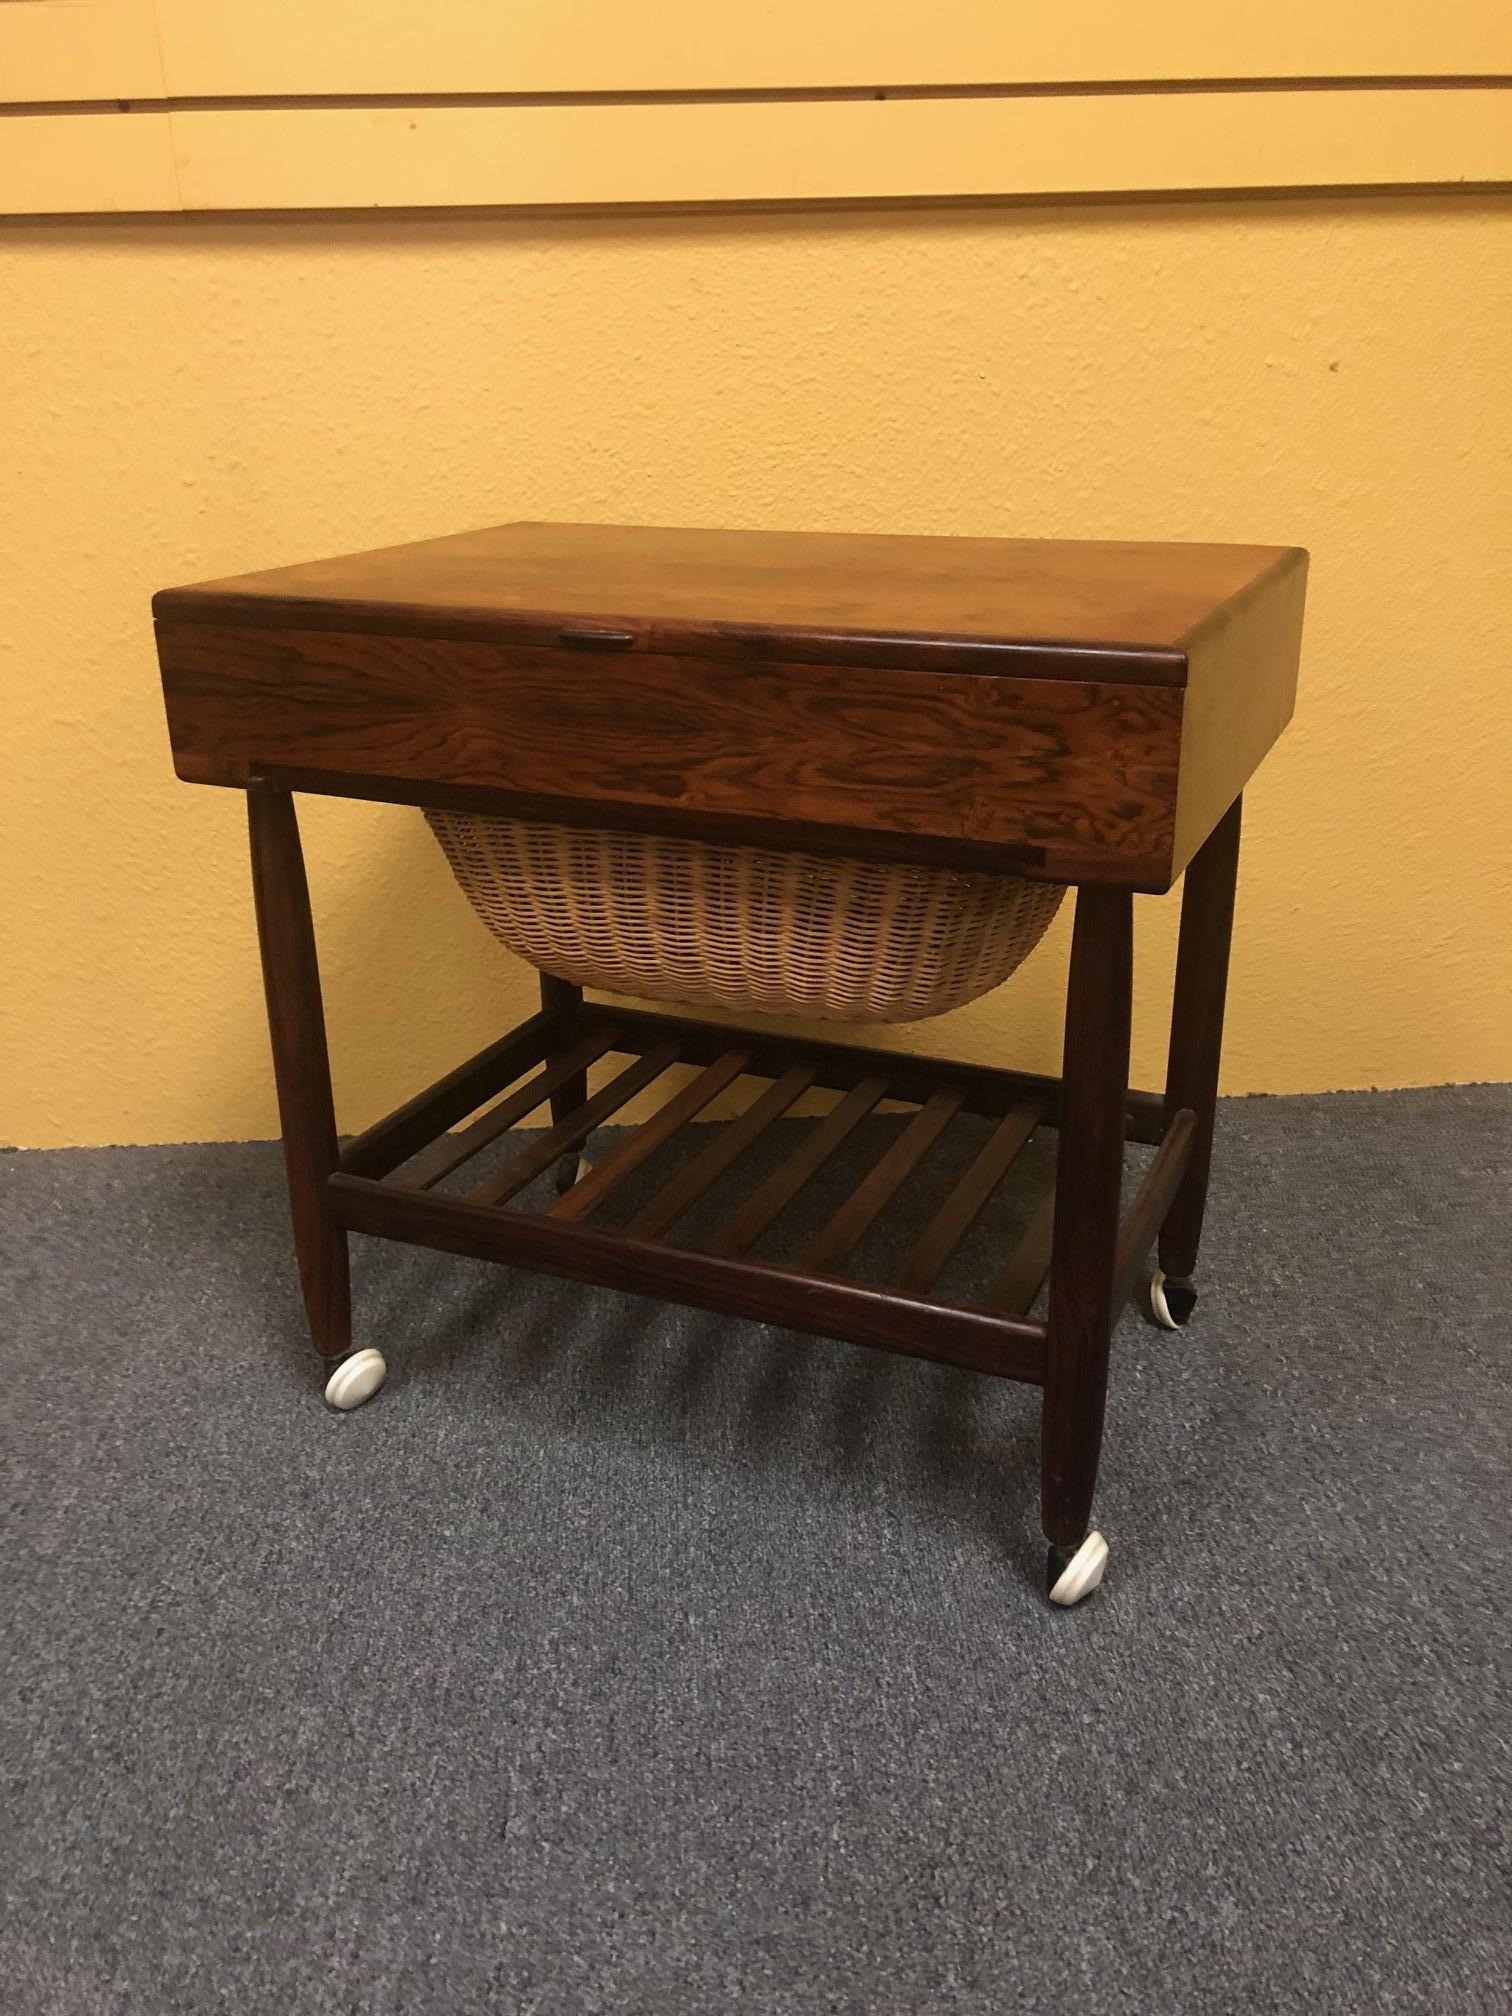 Wonderful midcentury rosewood sewing table / cart by Ejvind Johansson for Vitre of Denmark, circa 1960s. The stylish design features a rosewood handle to access interior compartmentalized storage, while a lower shelf allows access to built in